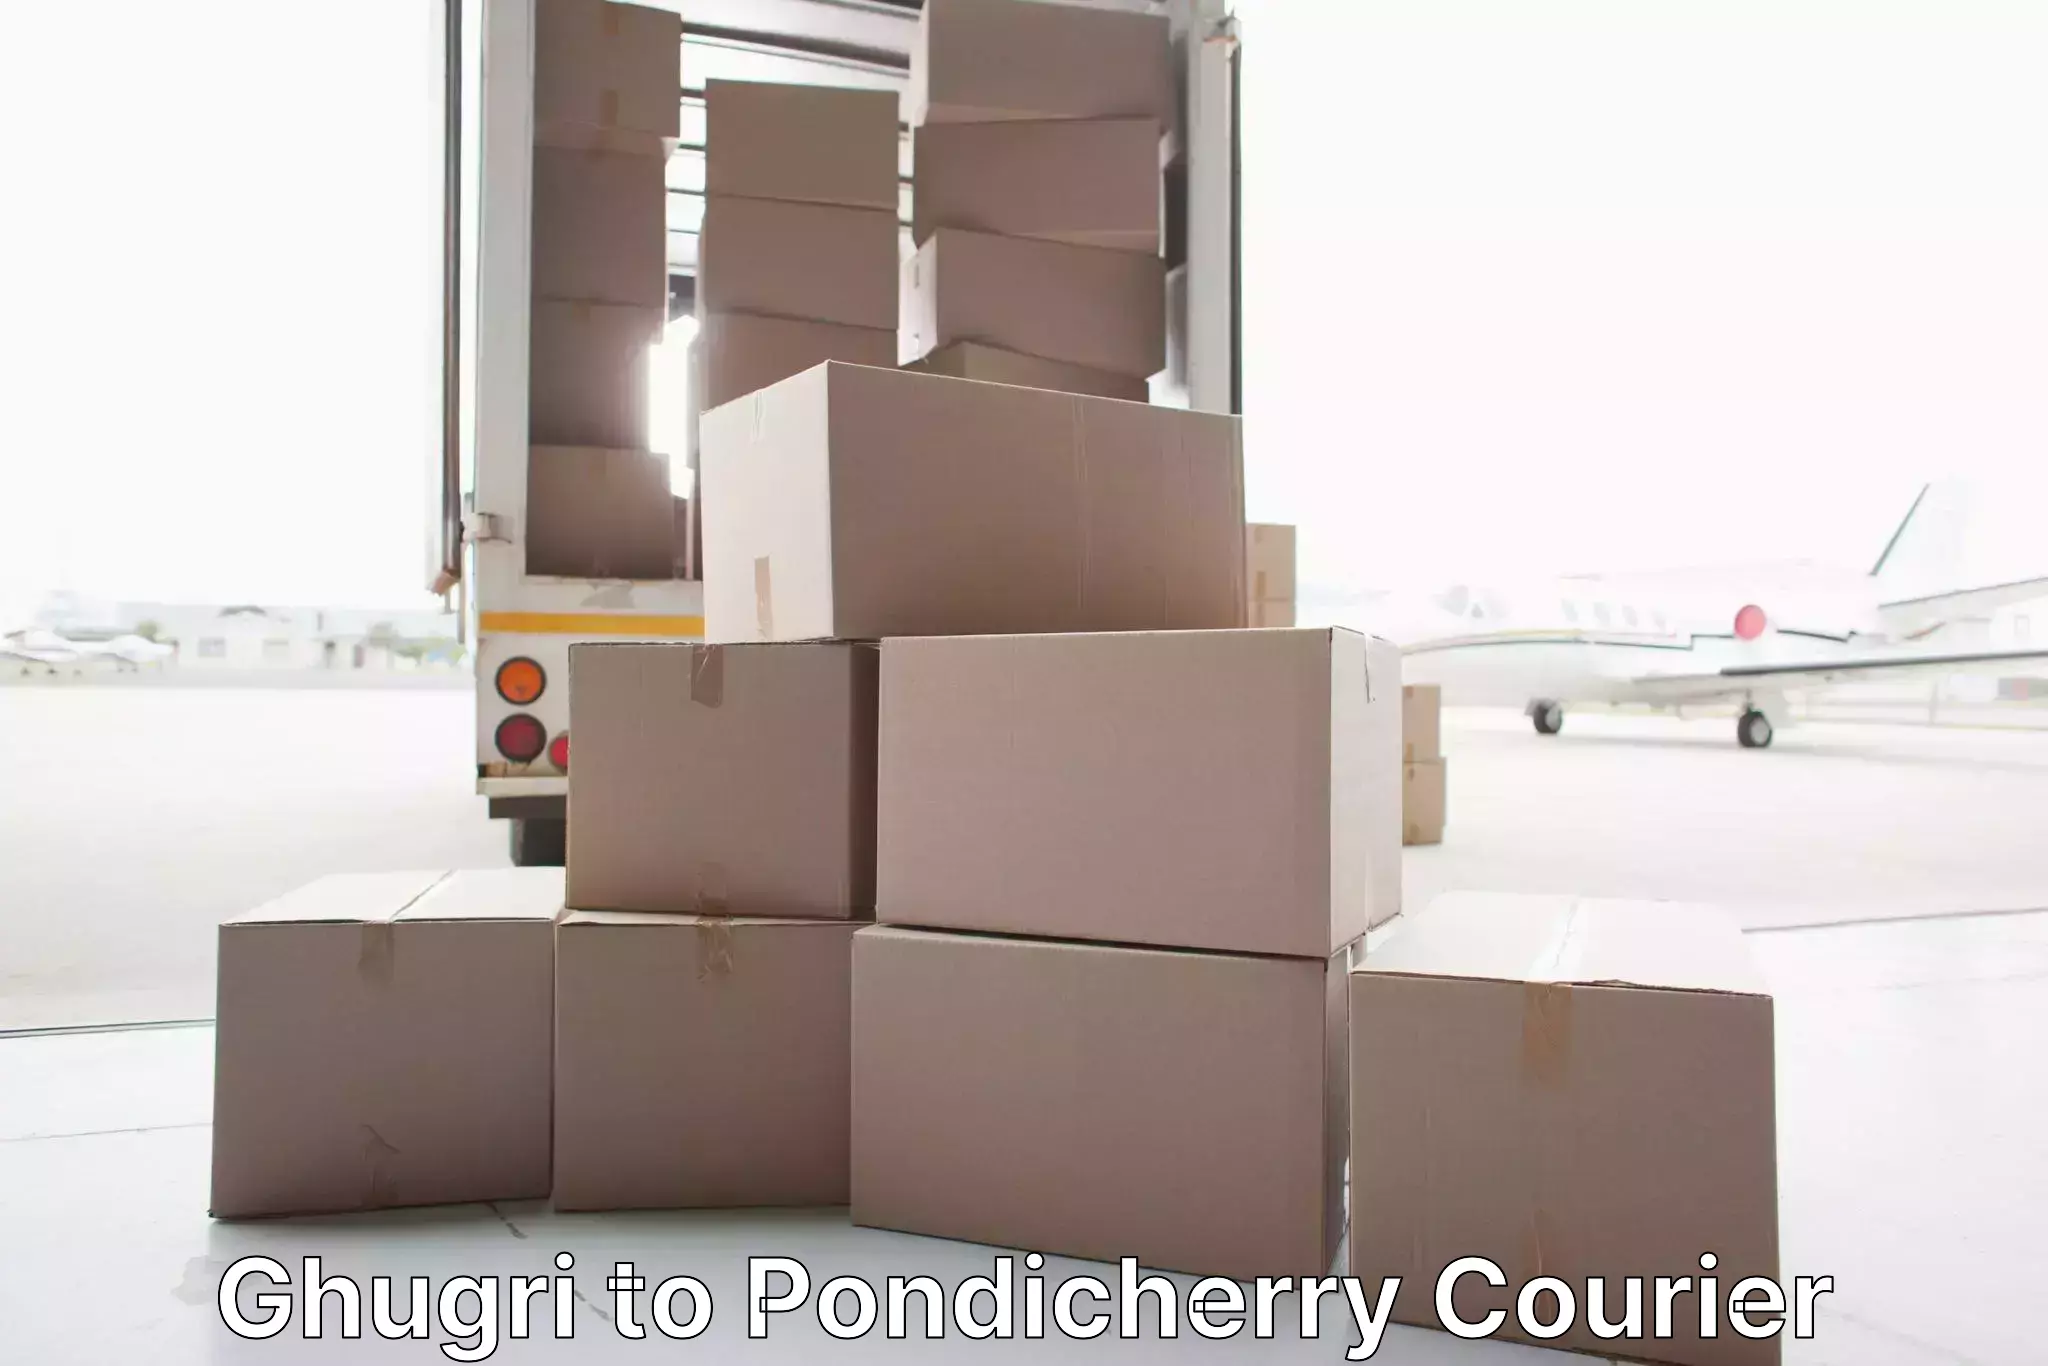 Professional moving assistance Ghugri to Pondicherry